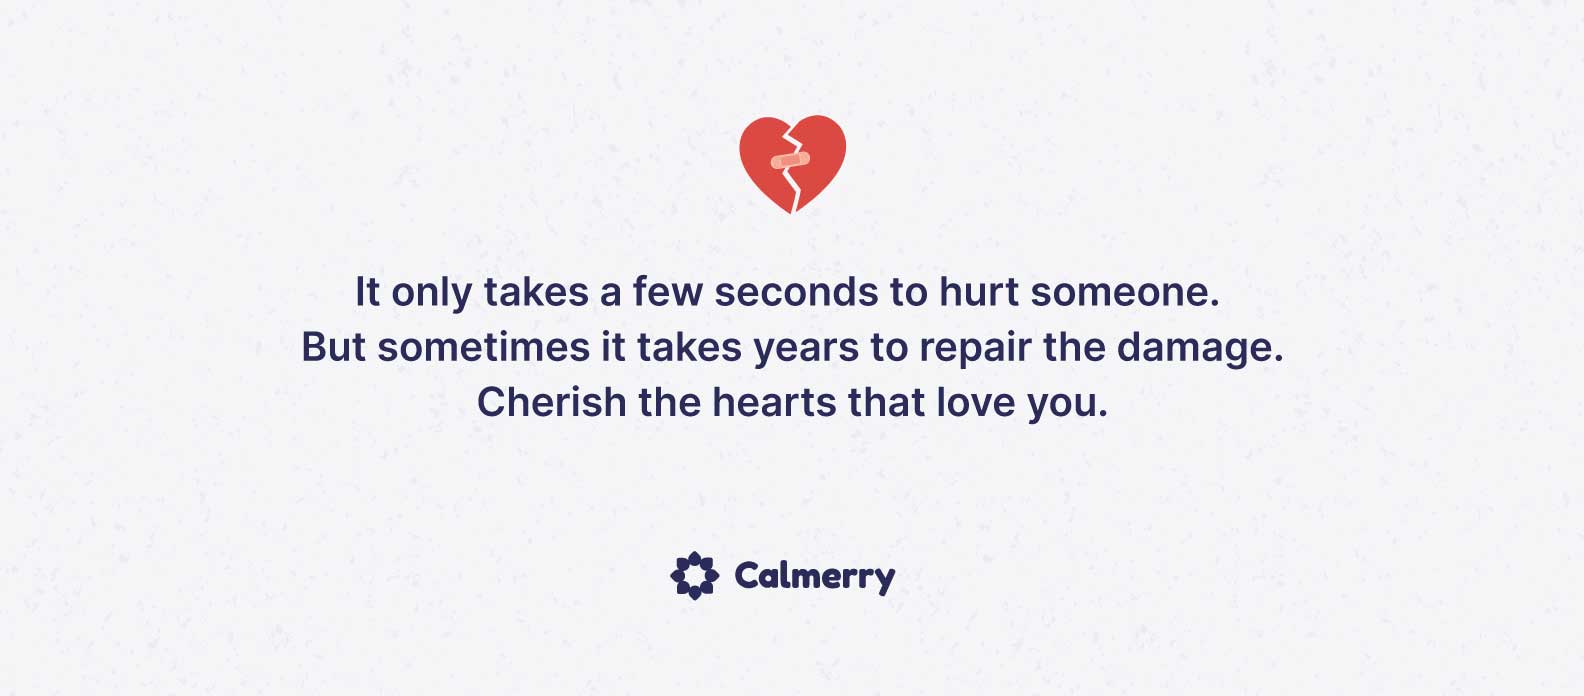 It only takes a few seconds to hurt someone